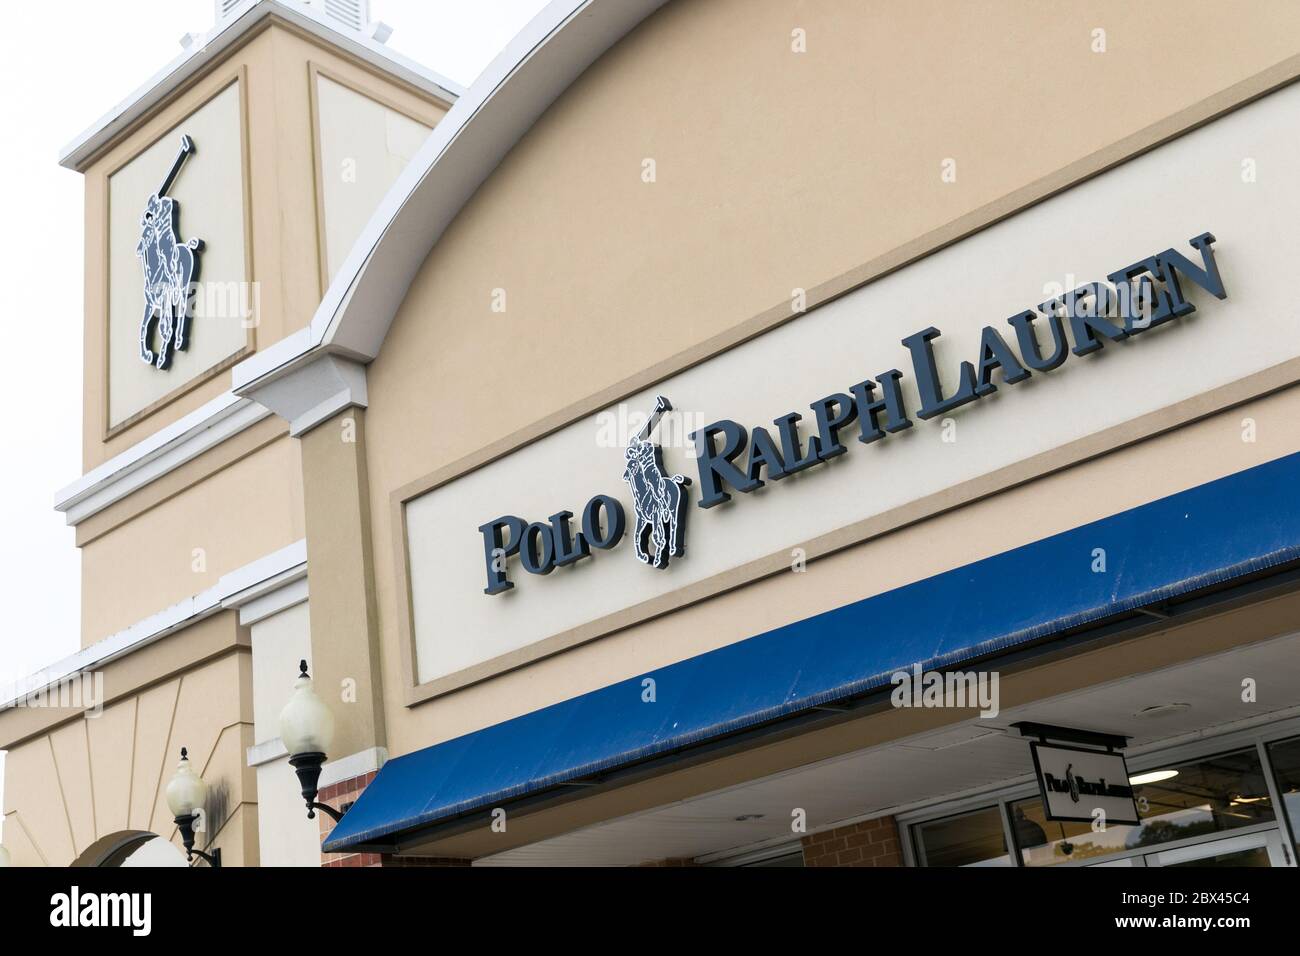 Polo Ralph Lauren Clothing Store In Las Americas Shopping Mall San Diego  Usa Stock Photo - Download Image Now - iStock